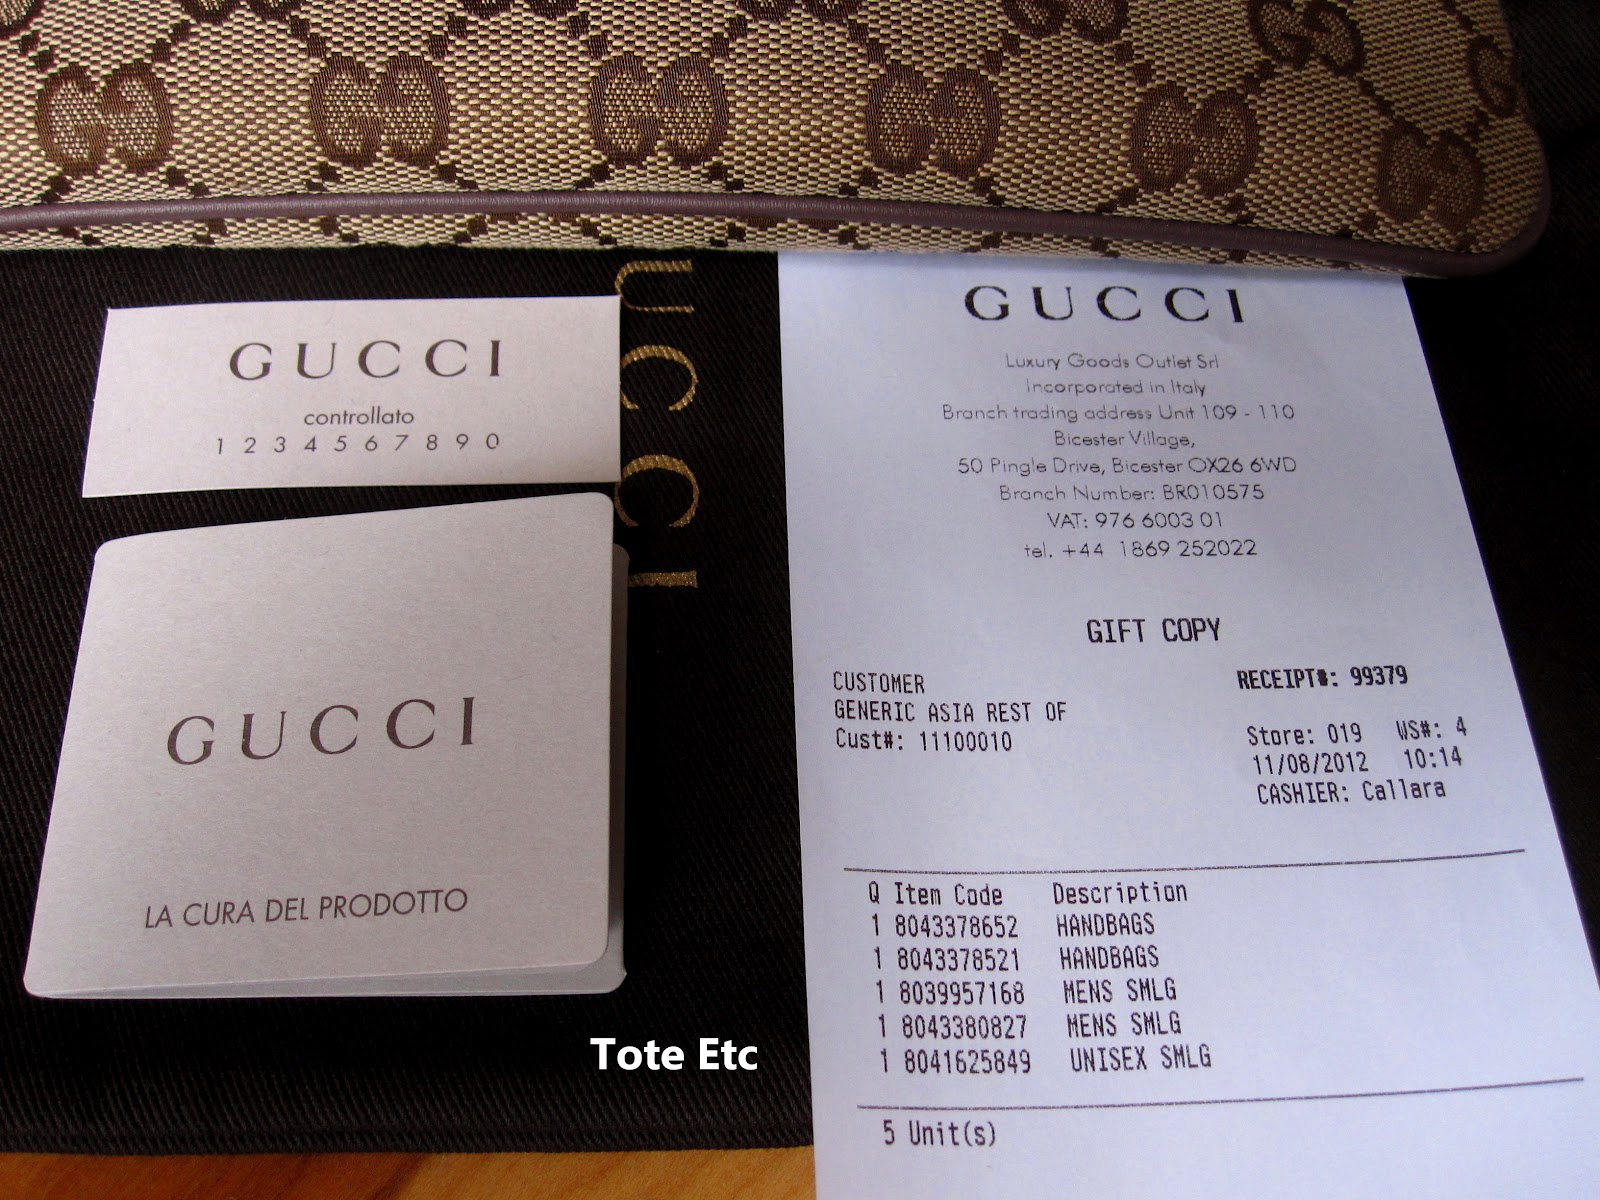 luxury goods outlet srl gucci